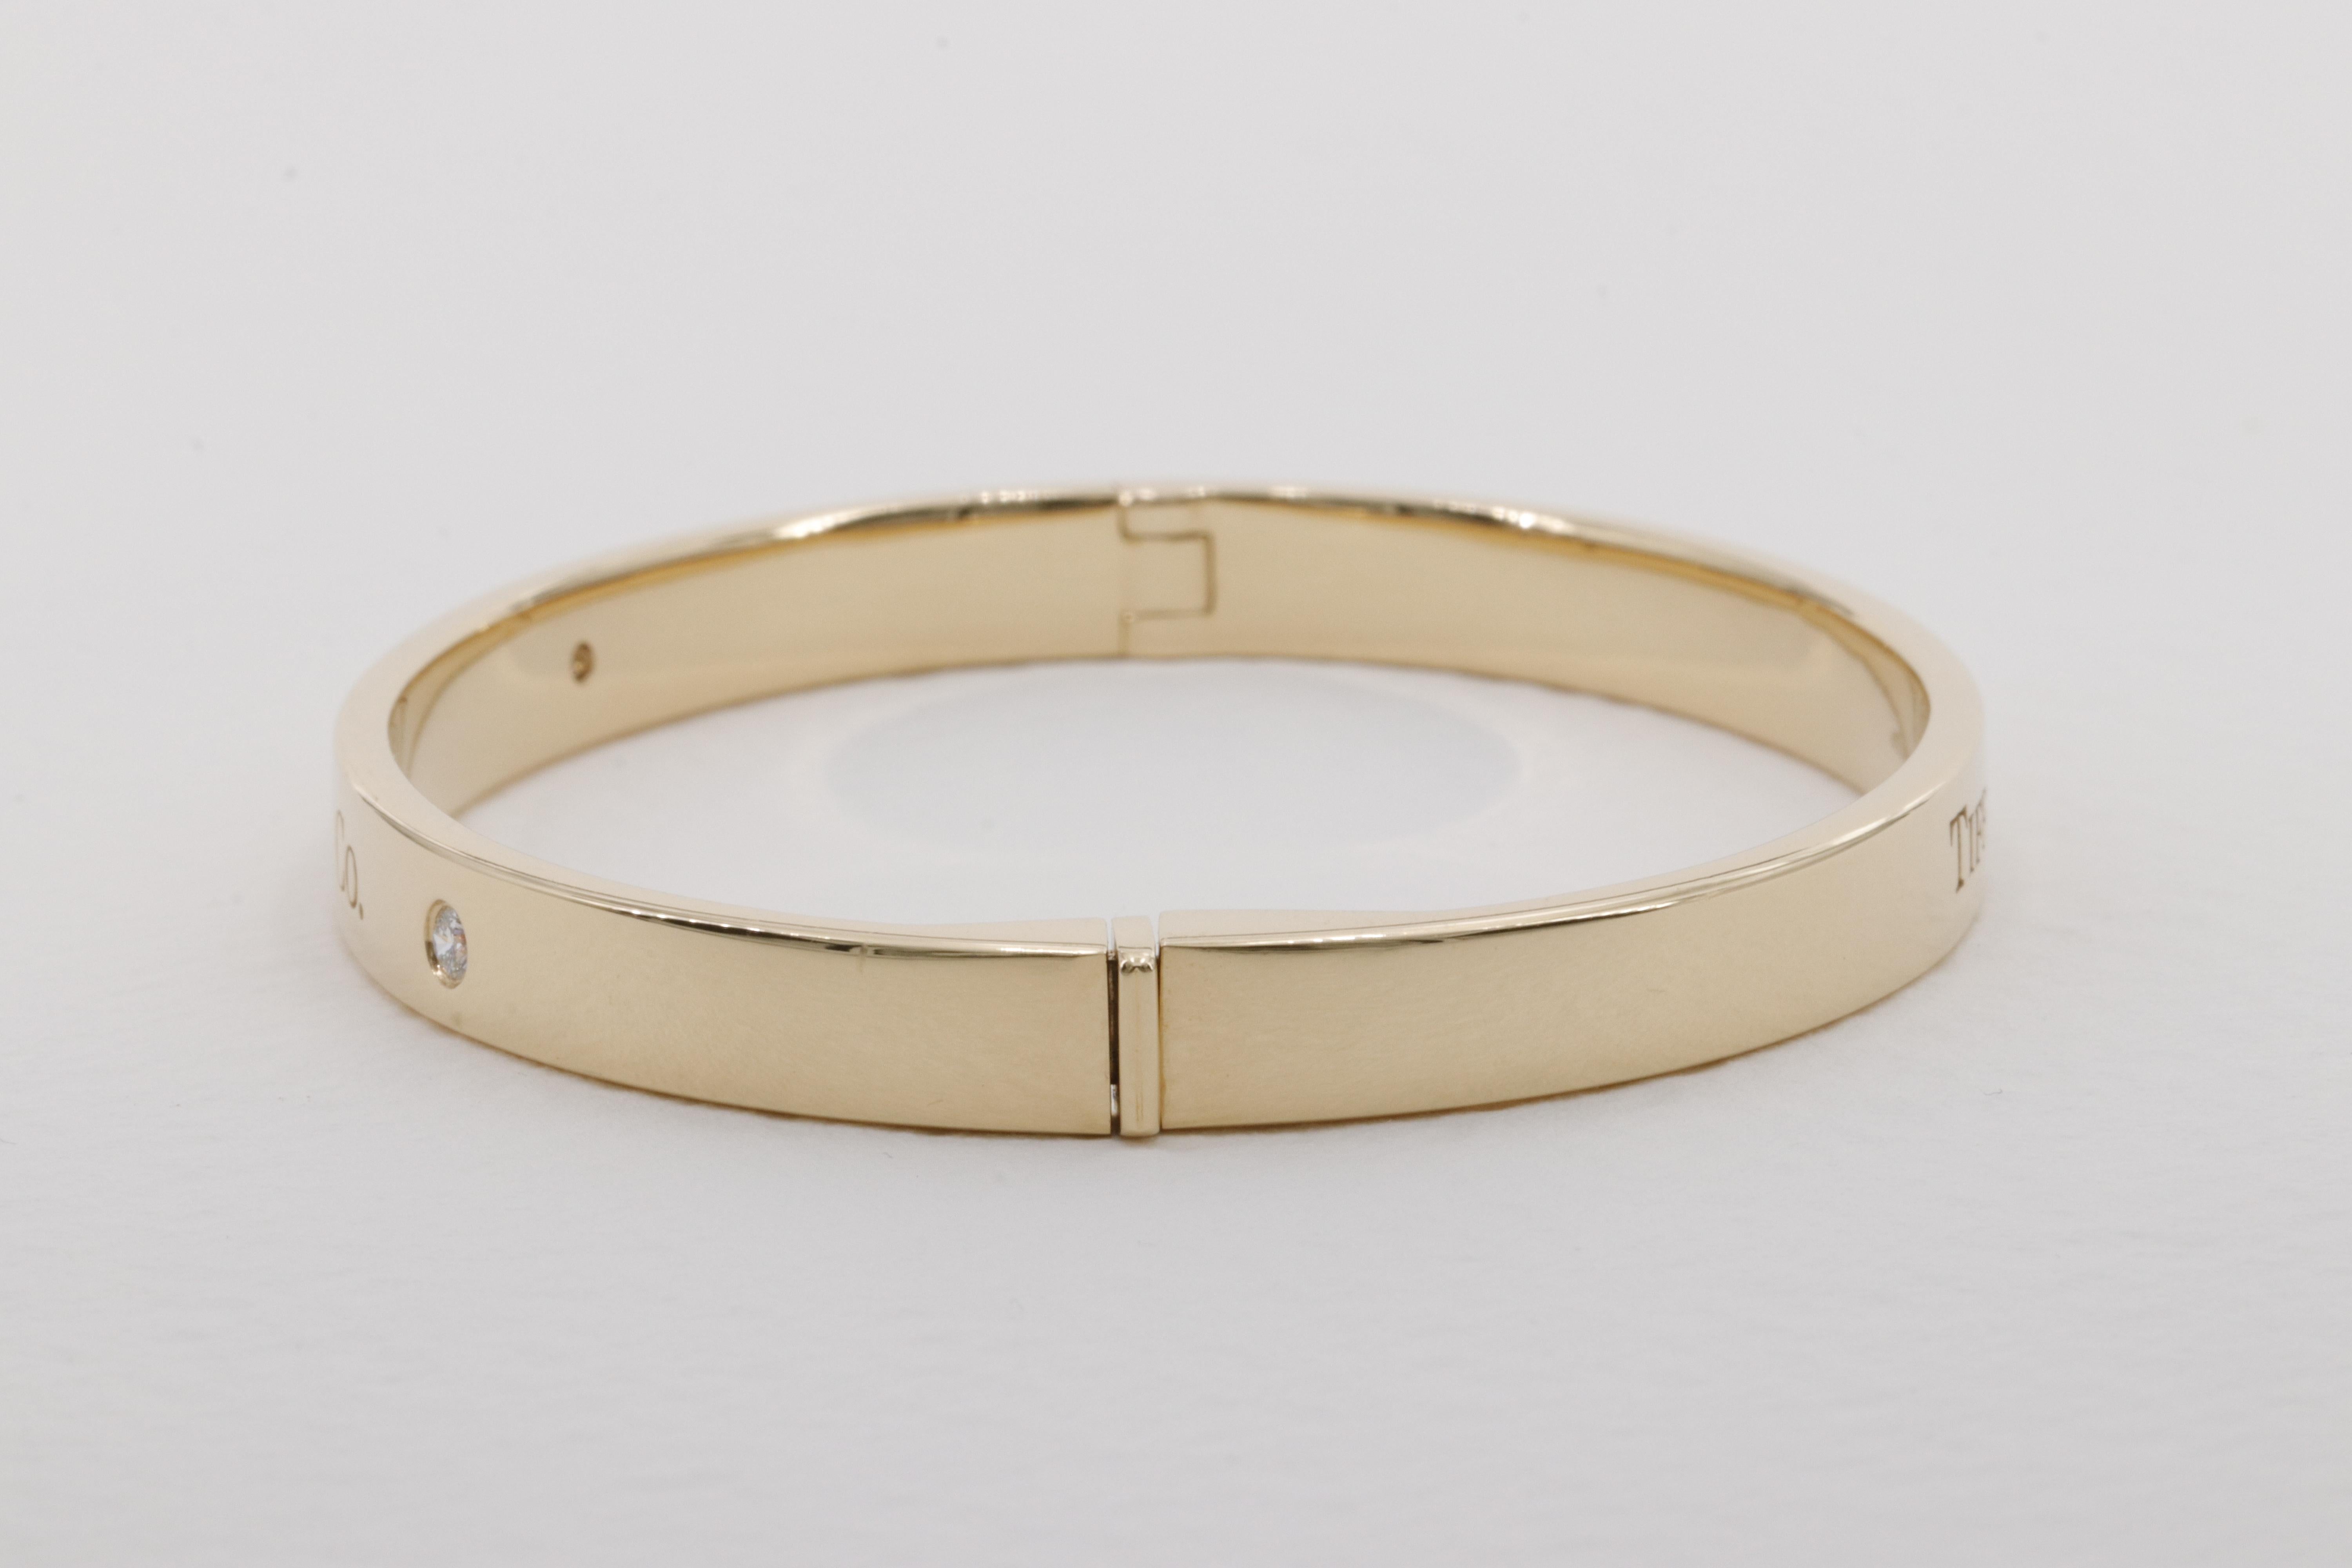 Tiffany & Co. Diamond Hinged Bangle in 18 Karat Yellow Gold  In Excellent Condition For Sale In Tampa, FL